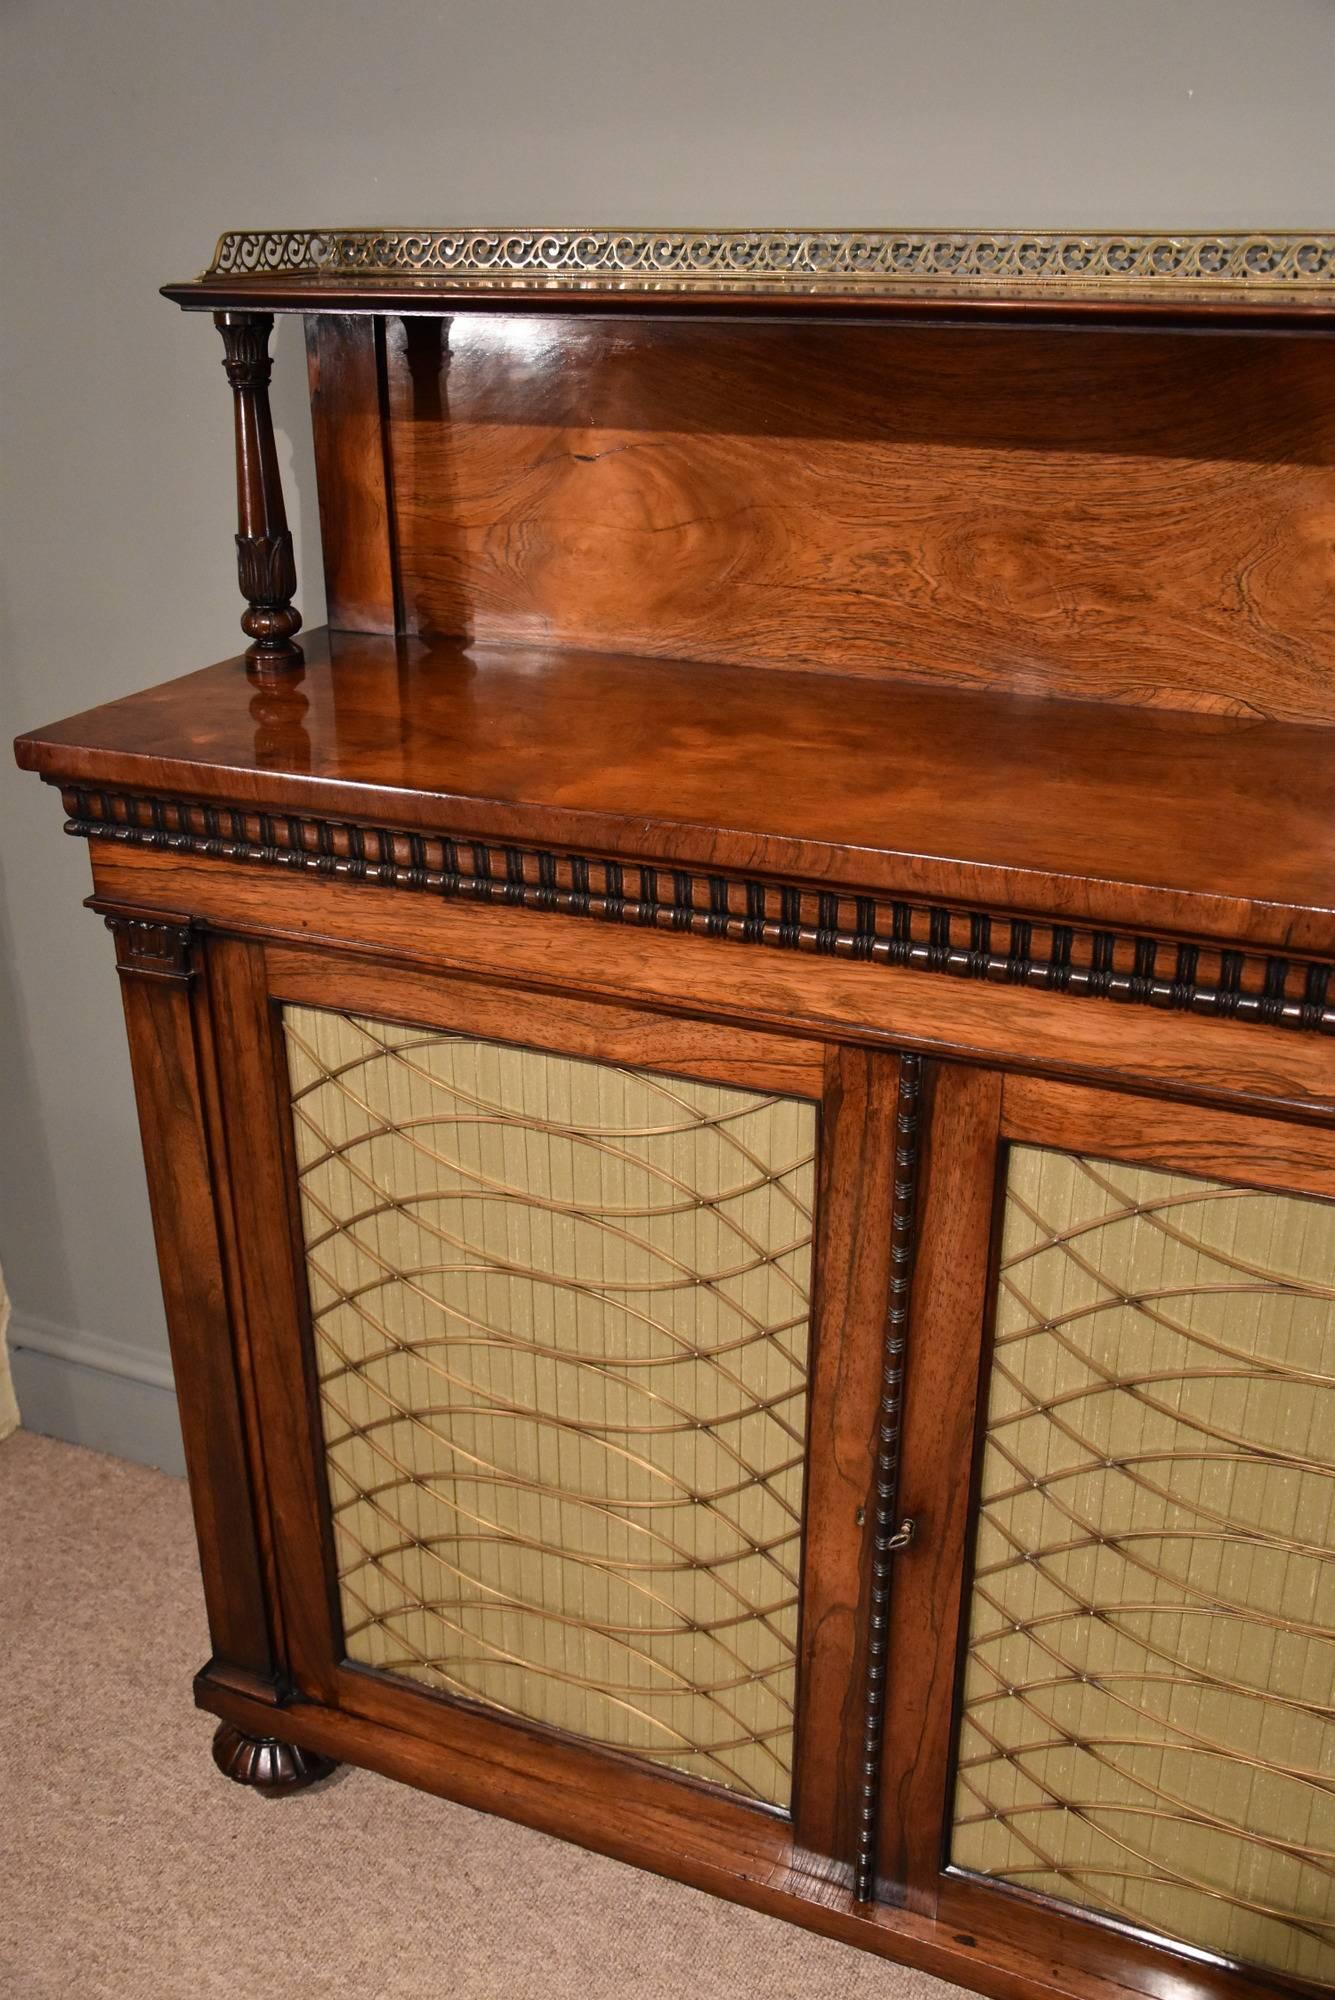 A fine Regency period rosewood chiffonier with a brass galleried ledge back over two brass grille doors, on melon carved feet. In the manner of Gillows, circa 1820.

Dimensions
Height 50